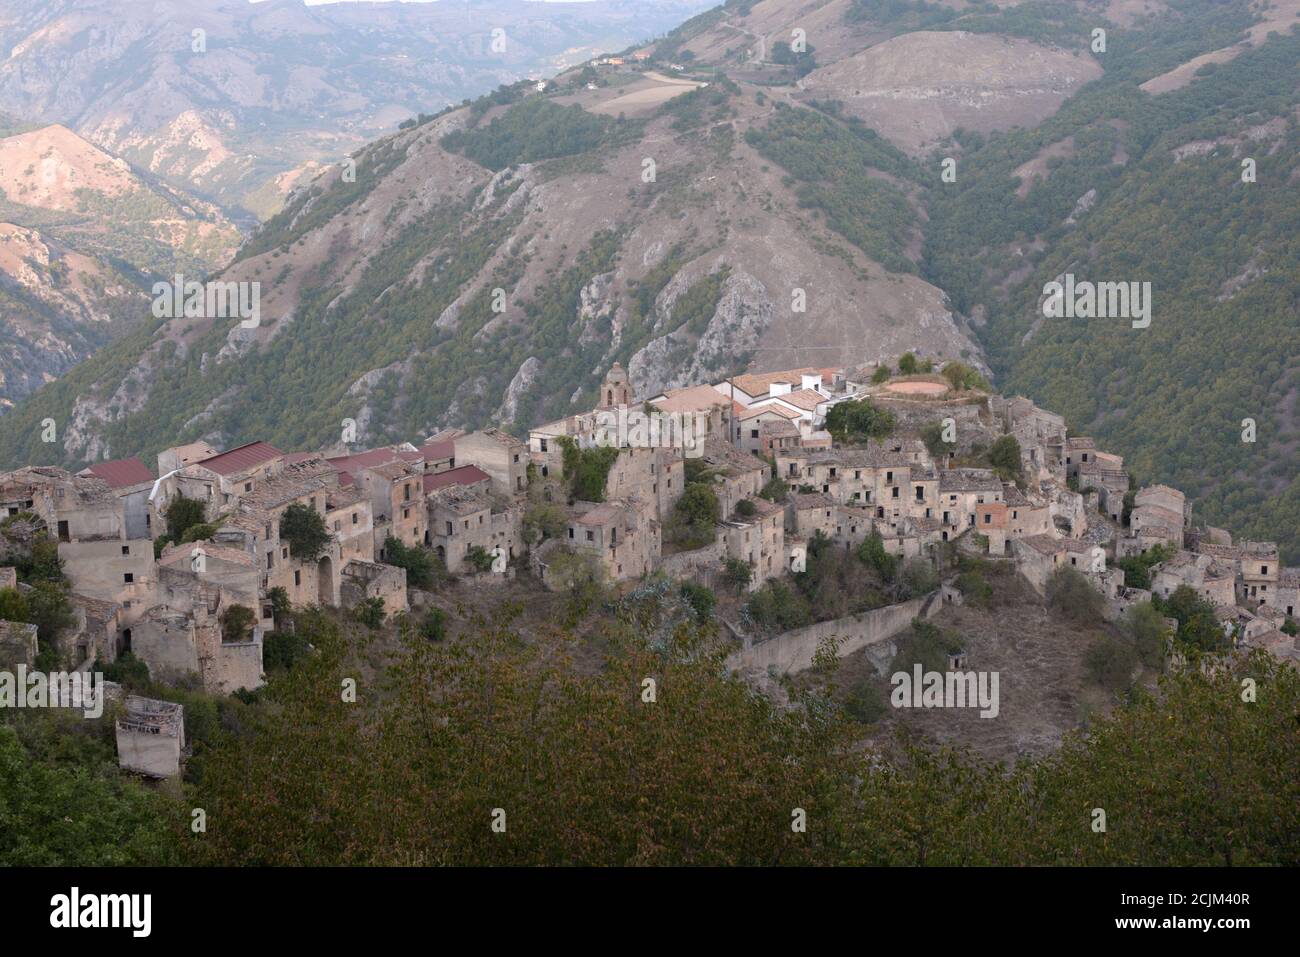 Italy : Romagnano Al Monte,Abandoned Town in Southern Italy,September 10,2020. Stock Photo